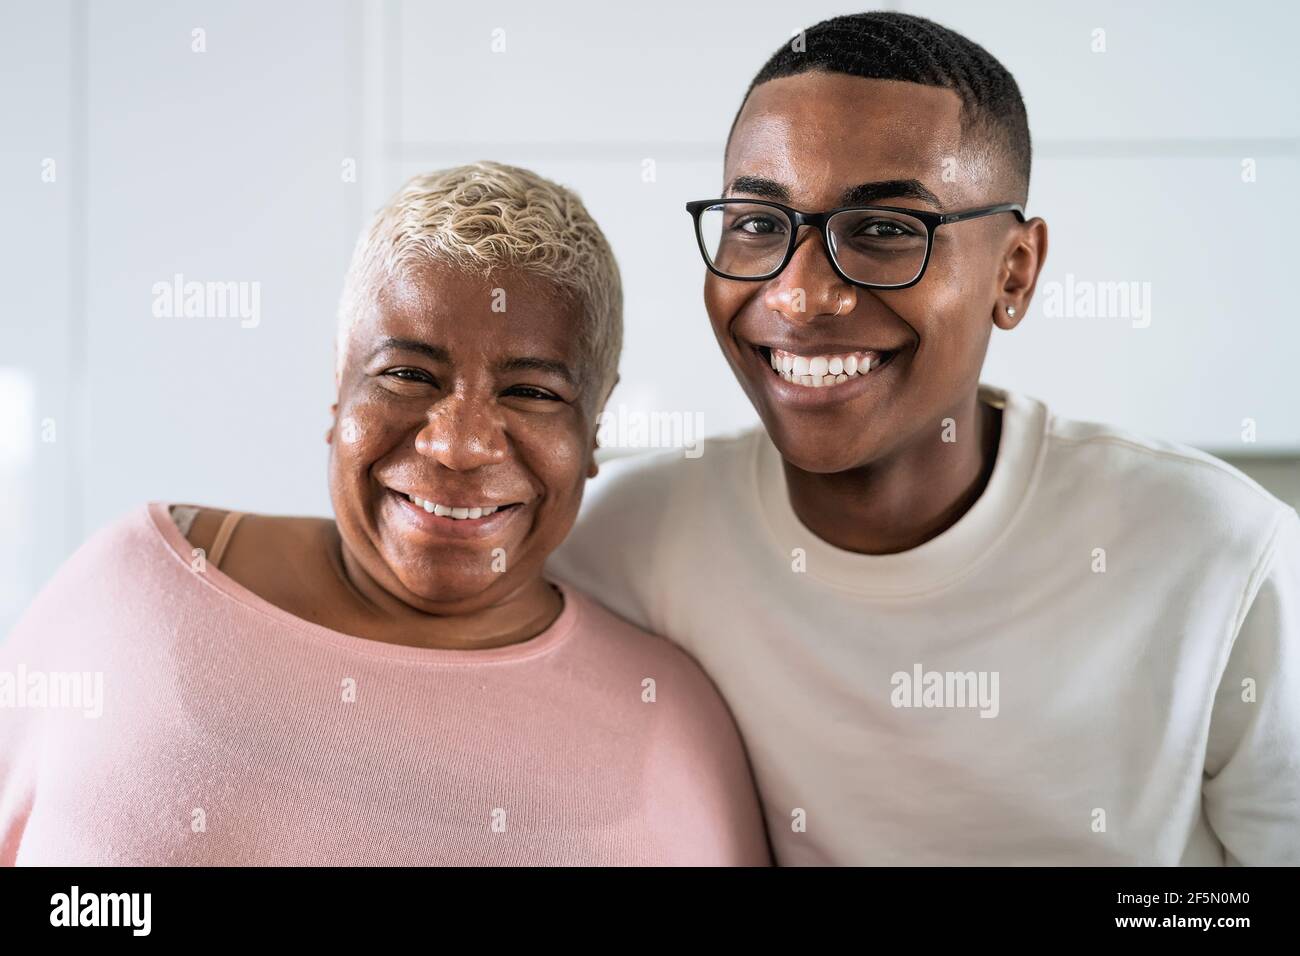 Happy smiling Hispanic mother and son portrait - Family love and unity concept Stock Photo